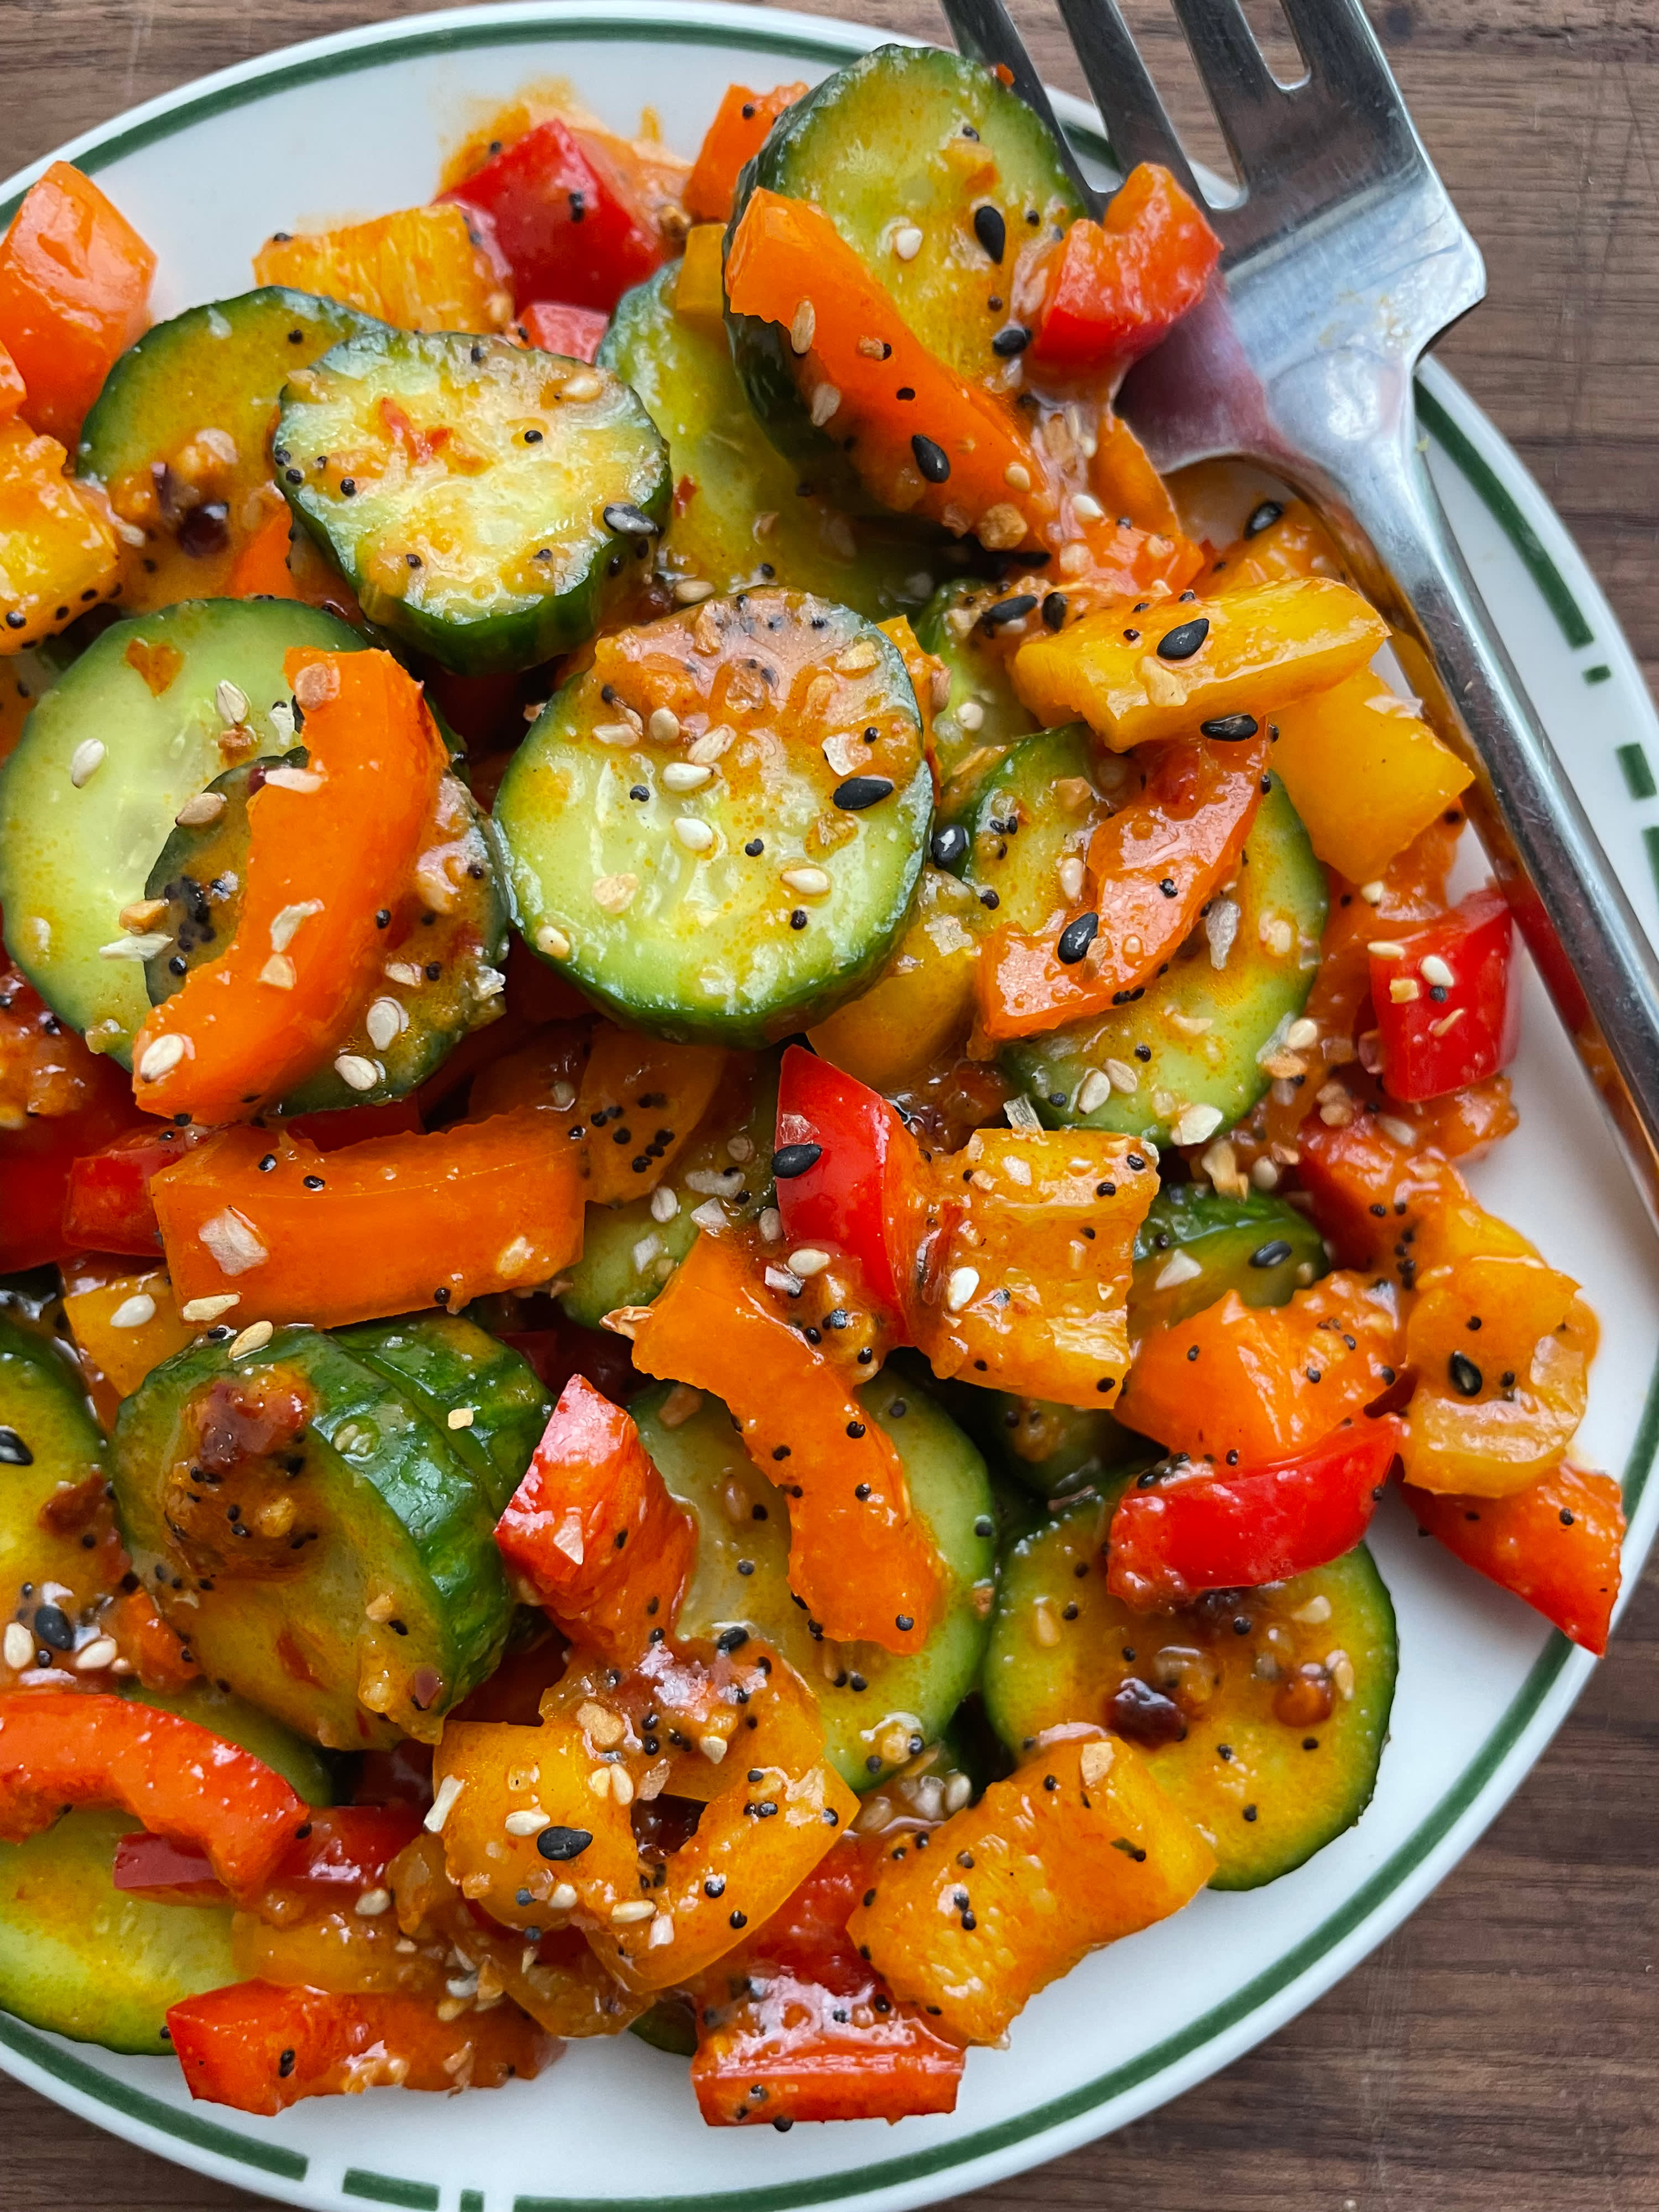 This Sweet Pepper and Cucumber Salad Is the Answer to Your Midday Munchies